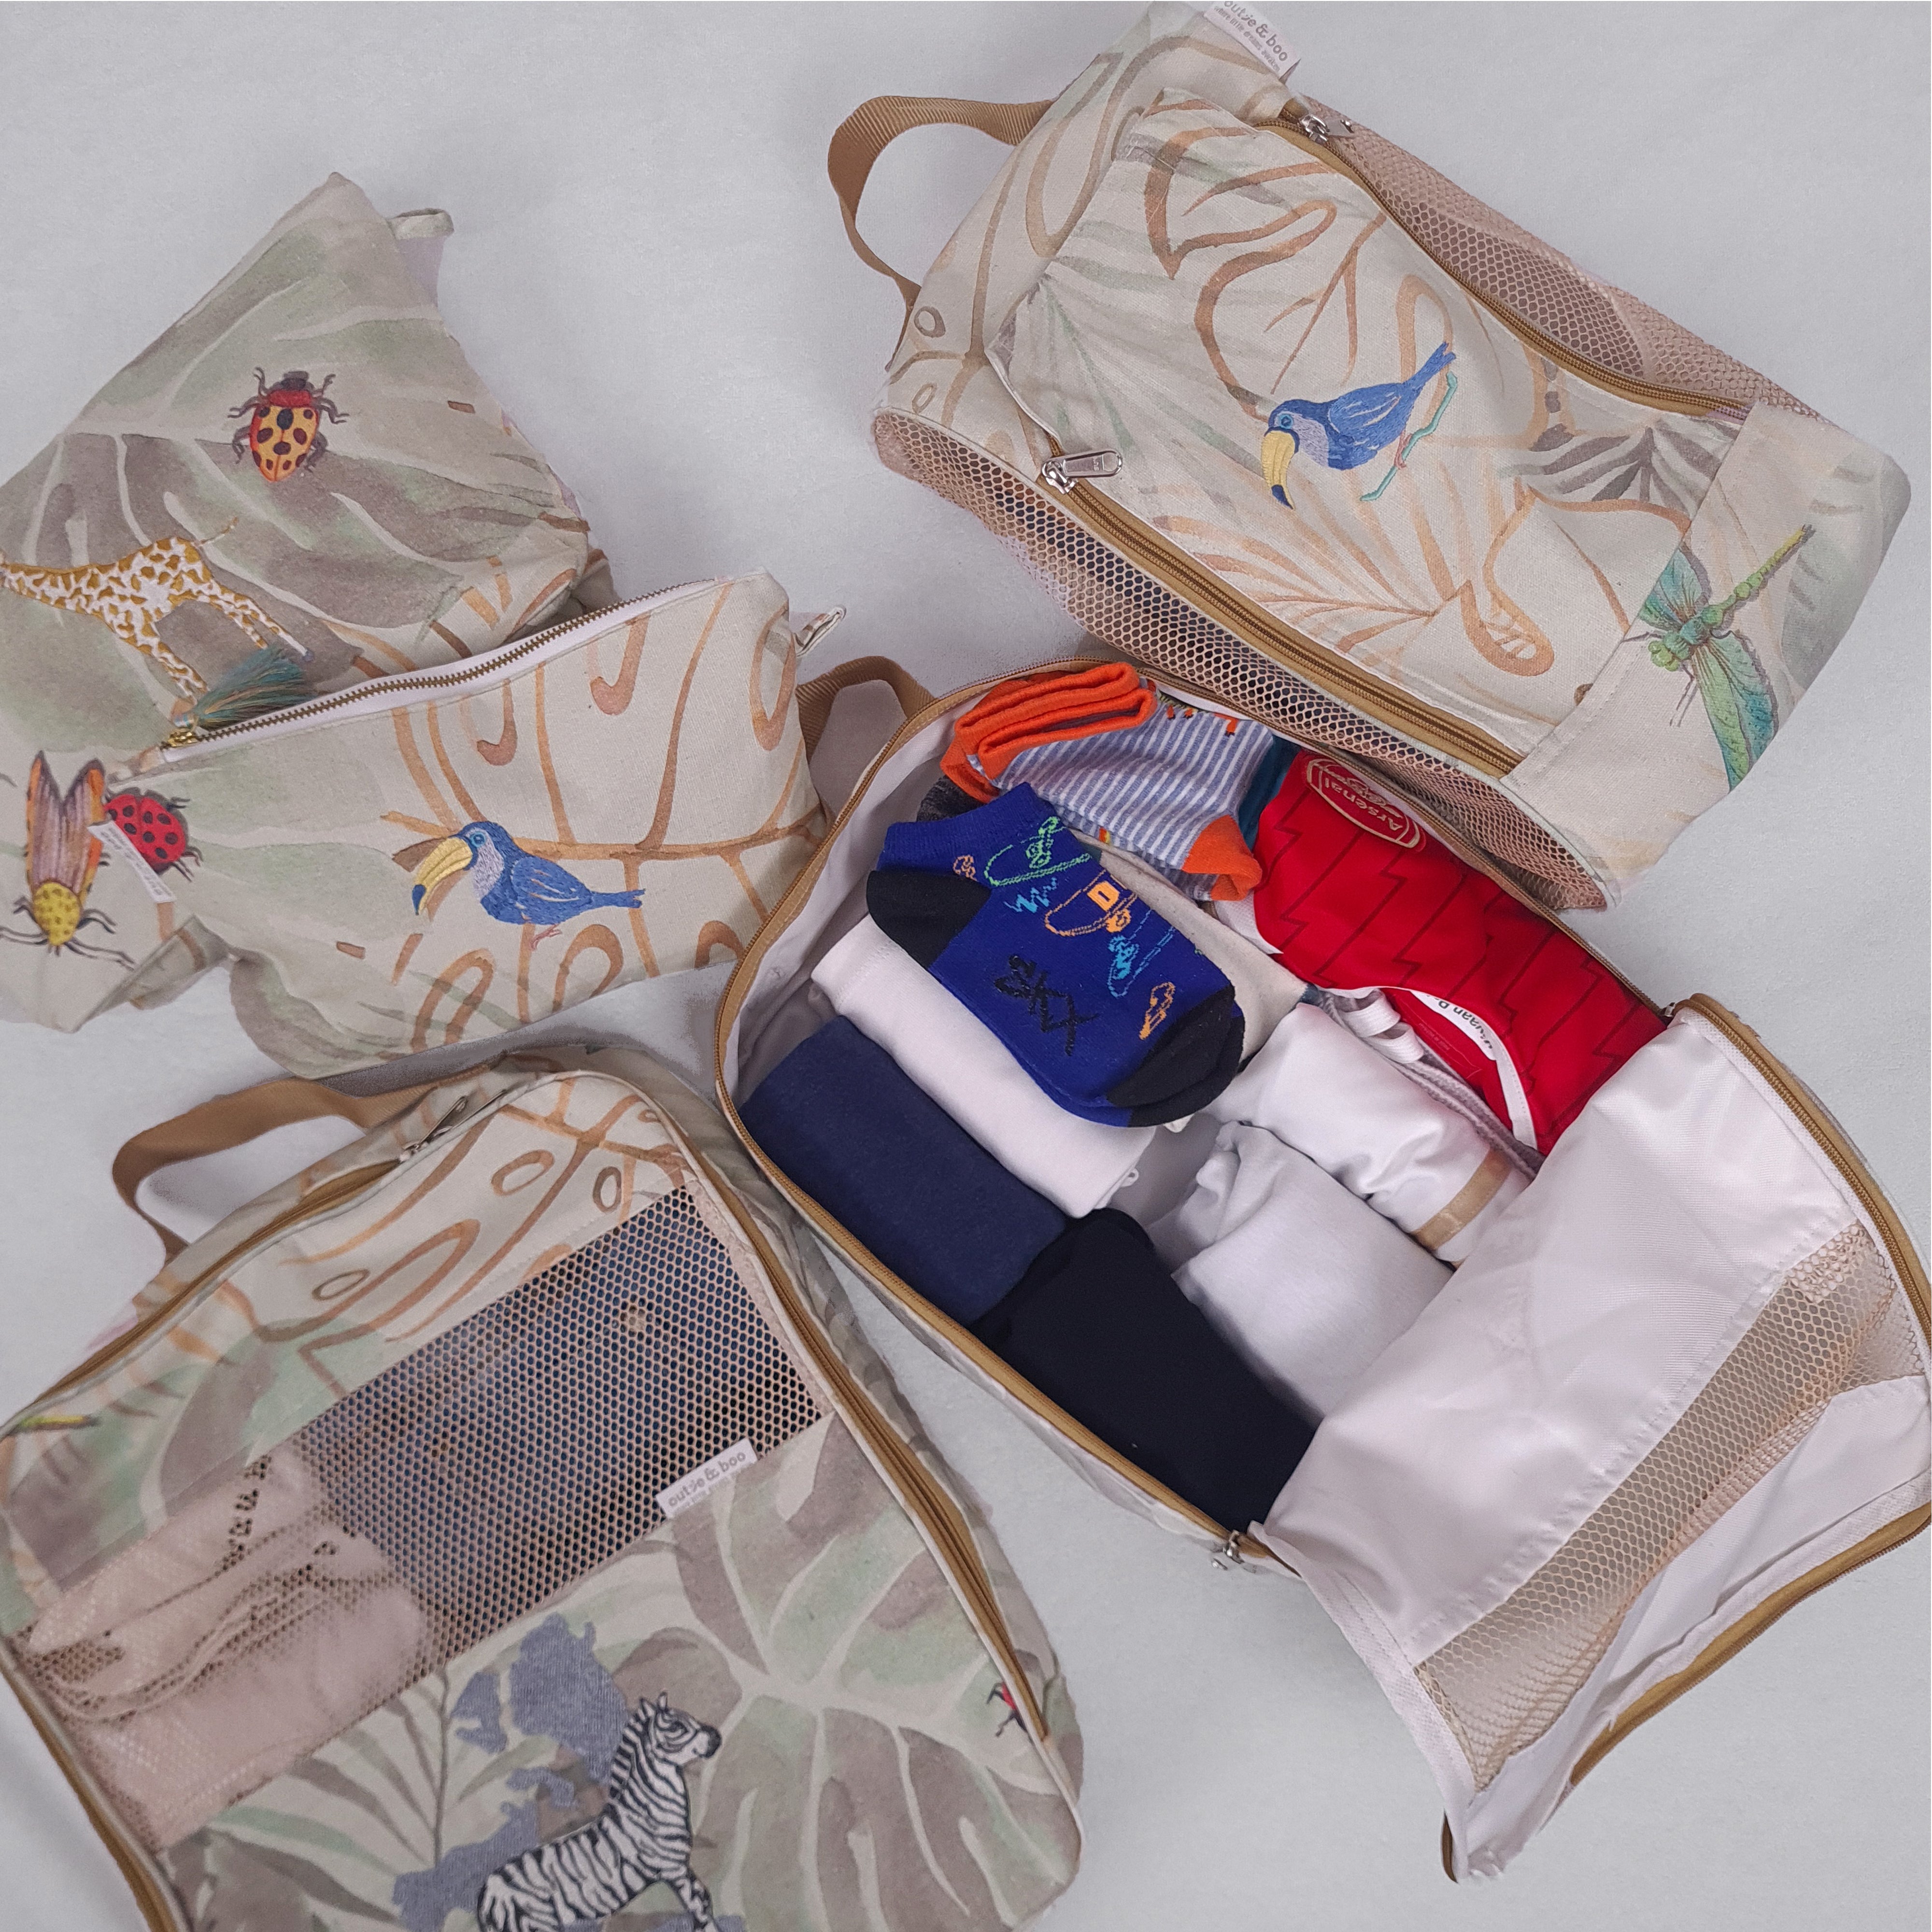 Baby It's Wild World Organizer Bags (Set of 5) Small Organizer Bag + Big Organizer Bag + Shoe Bag + Small Pouch + Big Pouch